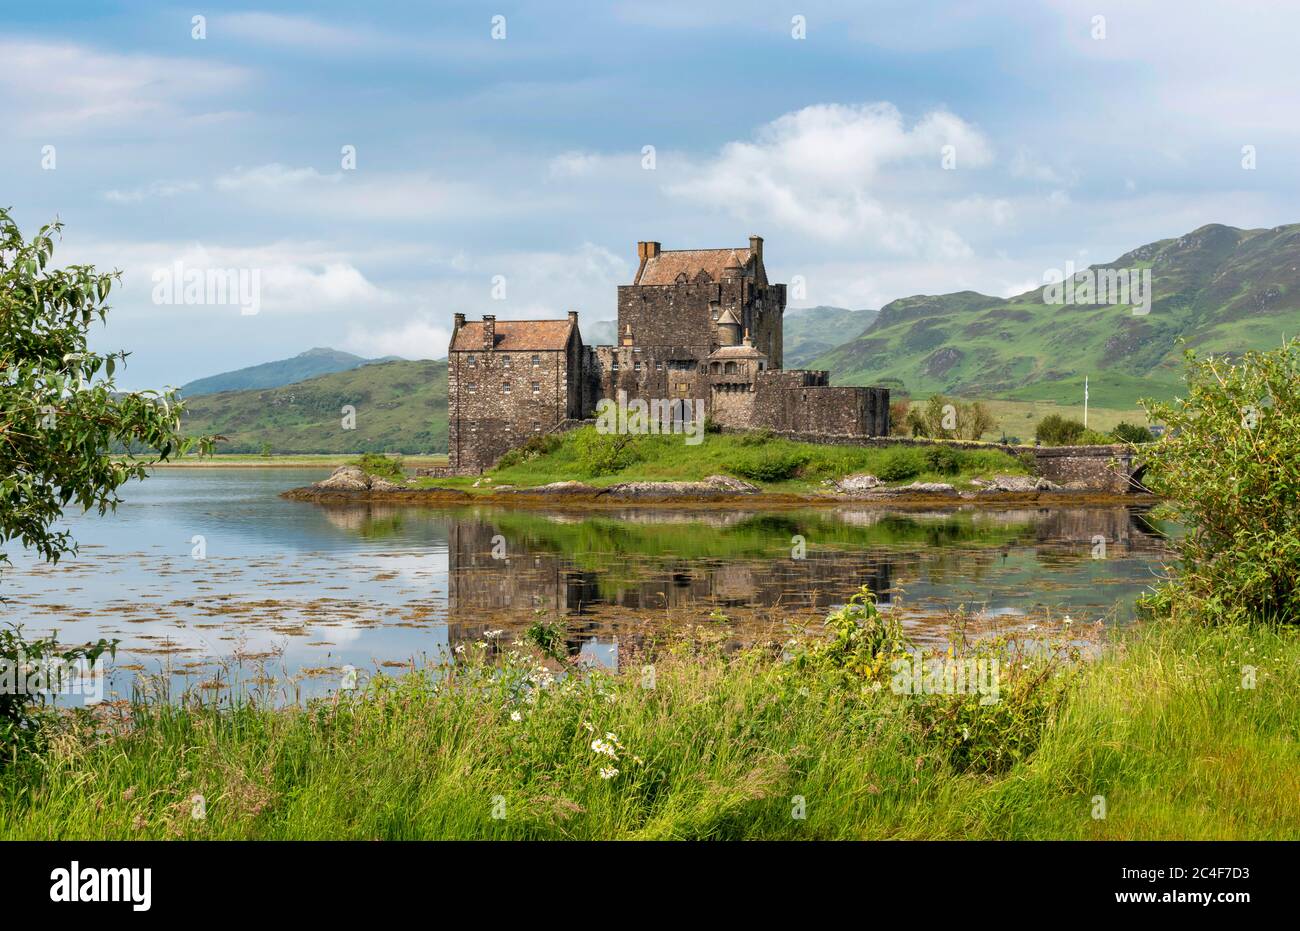 EILEAN DONAN CASTLE LOCH DUICH HIGHLAND SCOTLAND CASTLE ON AN ISLAND FLOWERS AND GRASSES IN JUNE Stock Photo